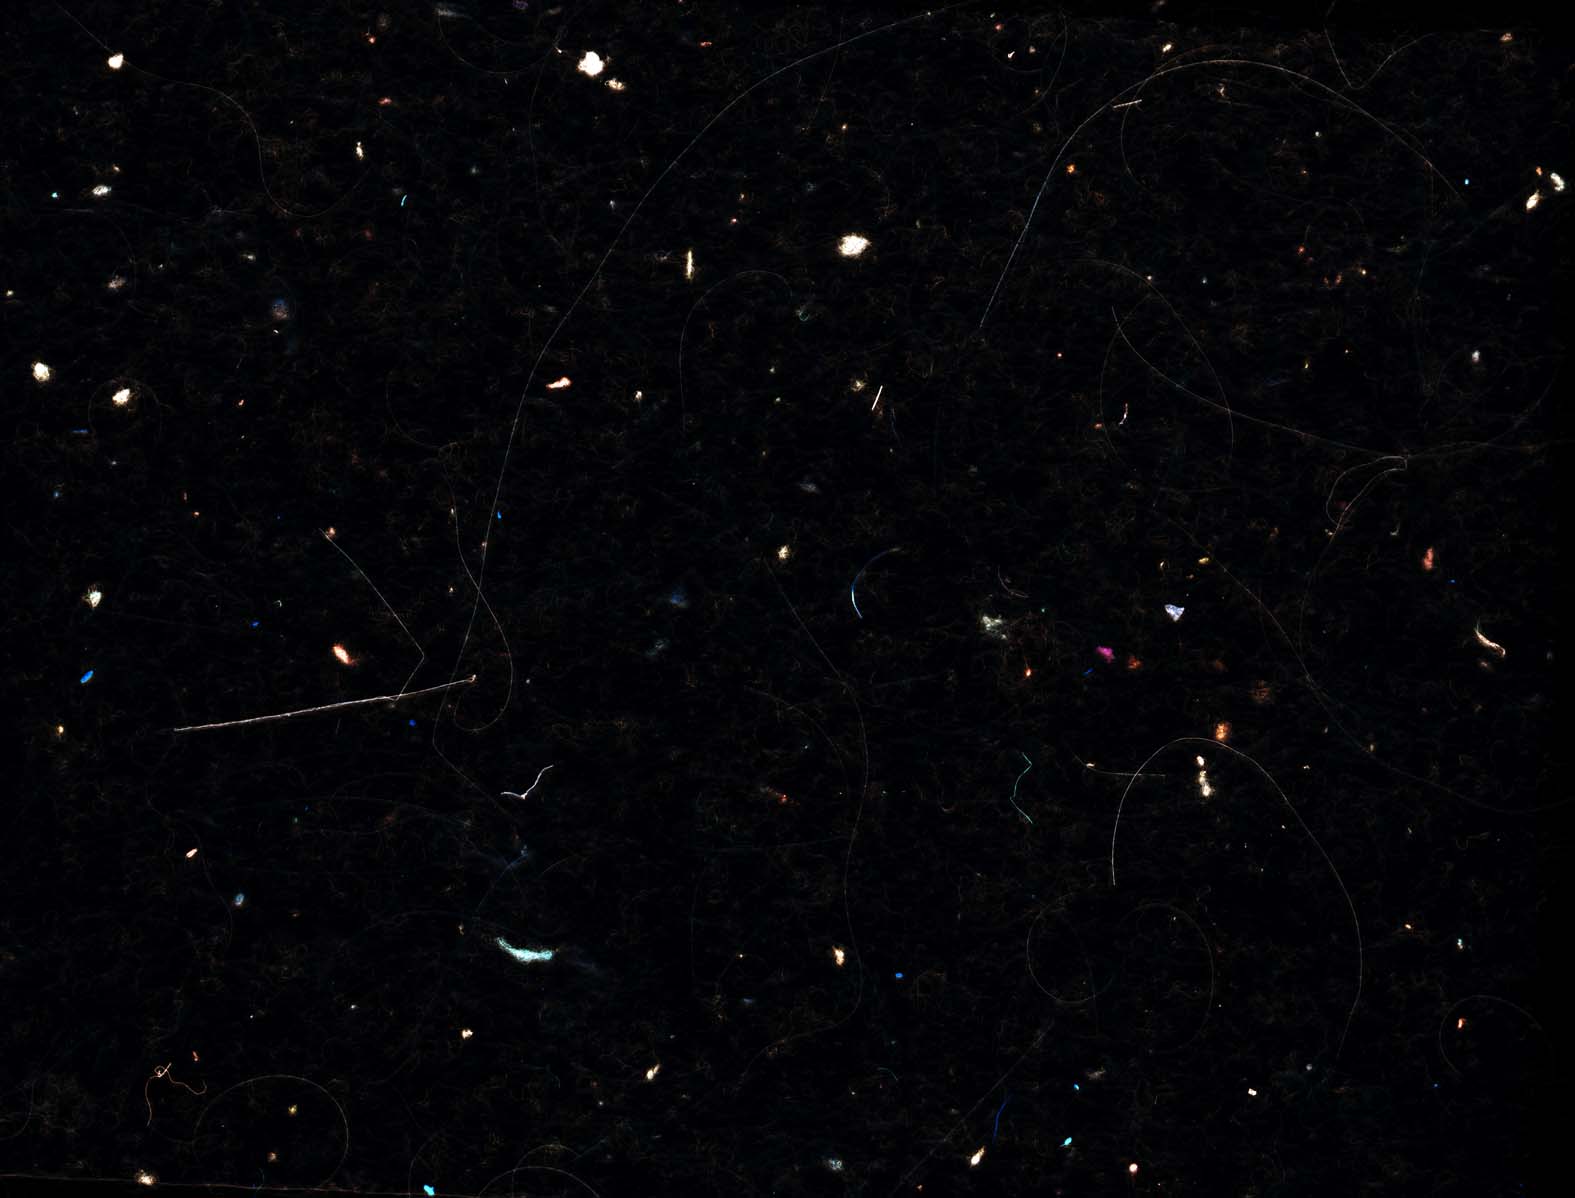 The Inequalities in the Motion of the Stars, 2008